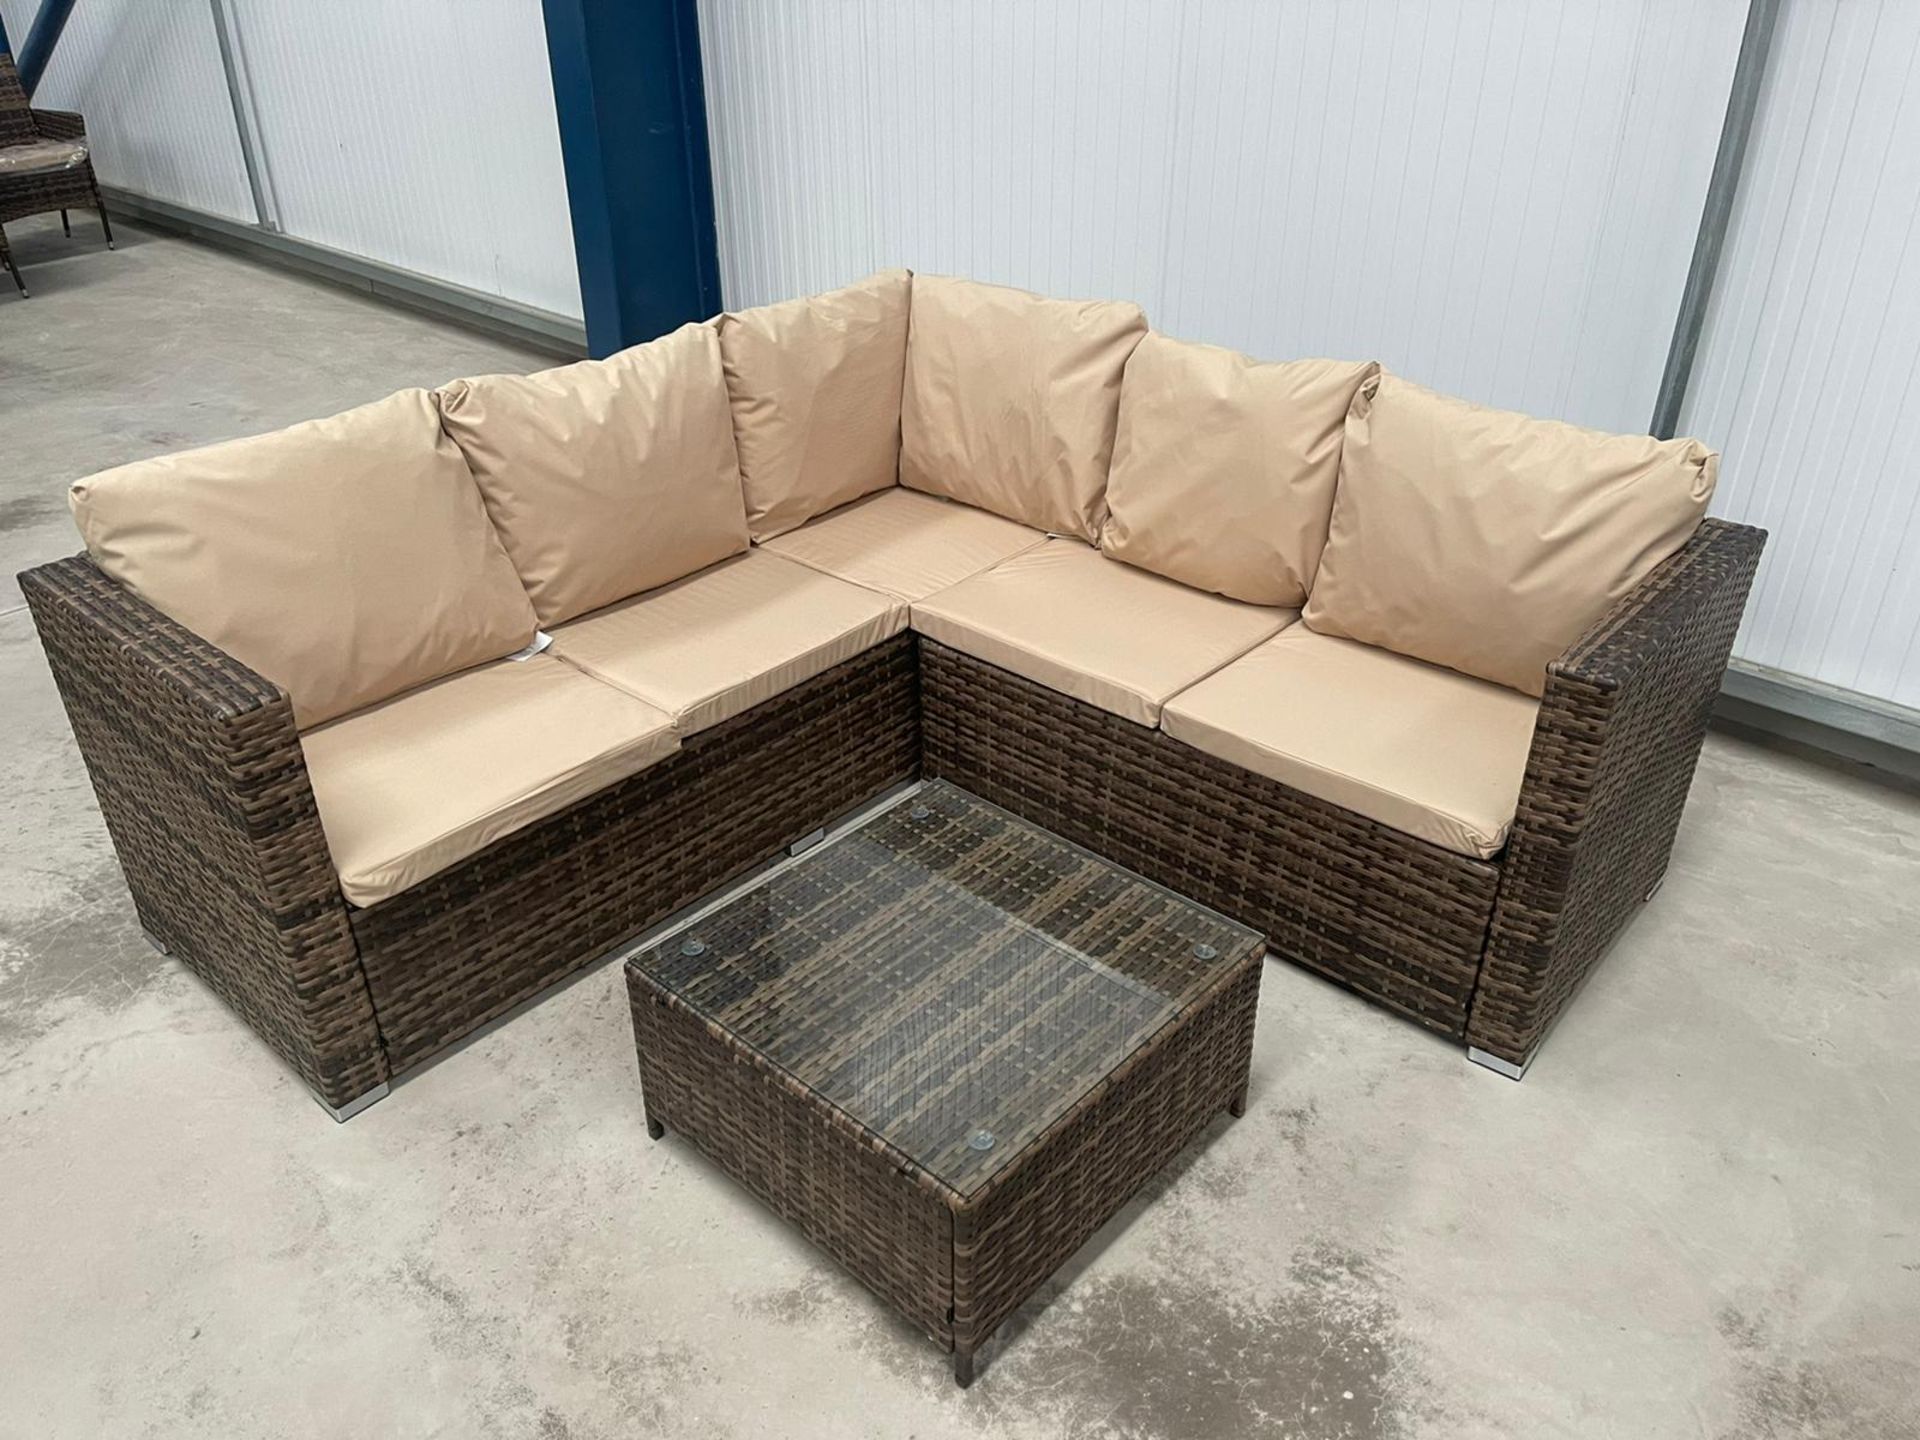 RRP £699 - NEW BROWN SIX SEATER CORNER SOFA WITH GLASS TOPPED COFFEE TABLE